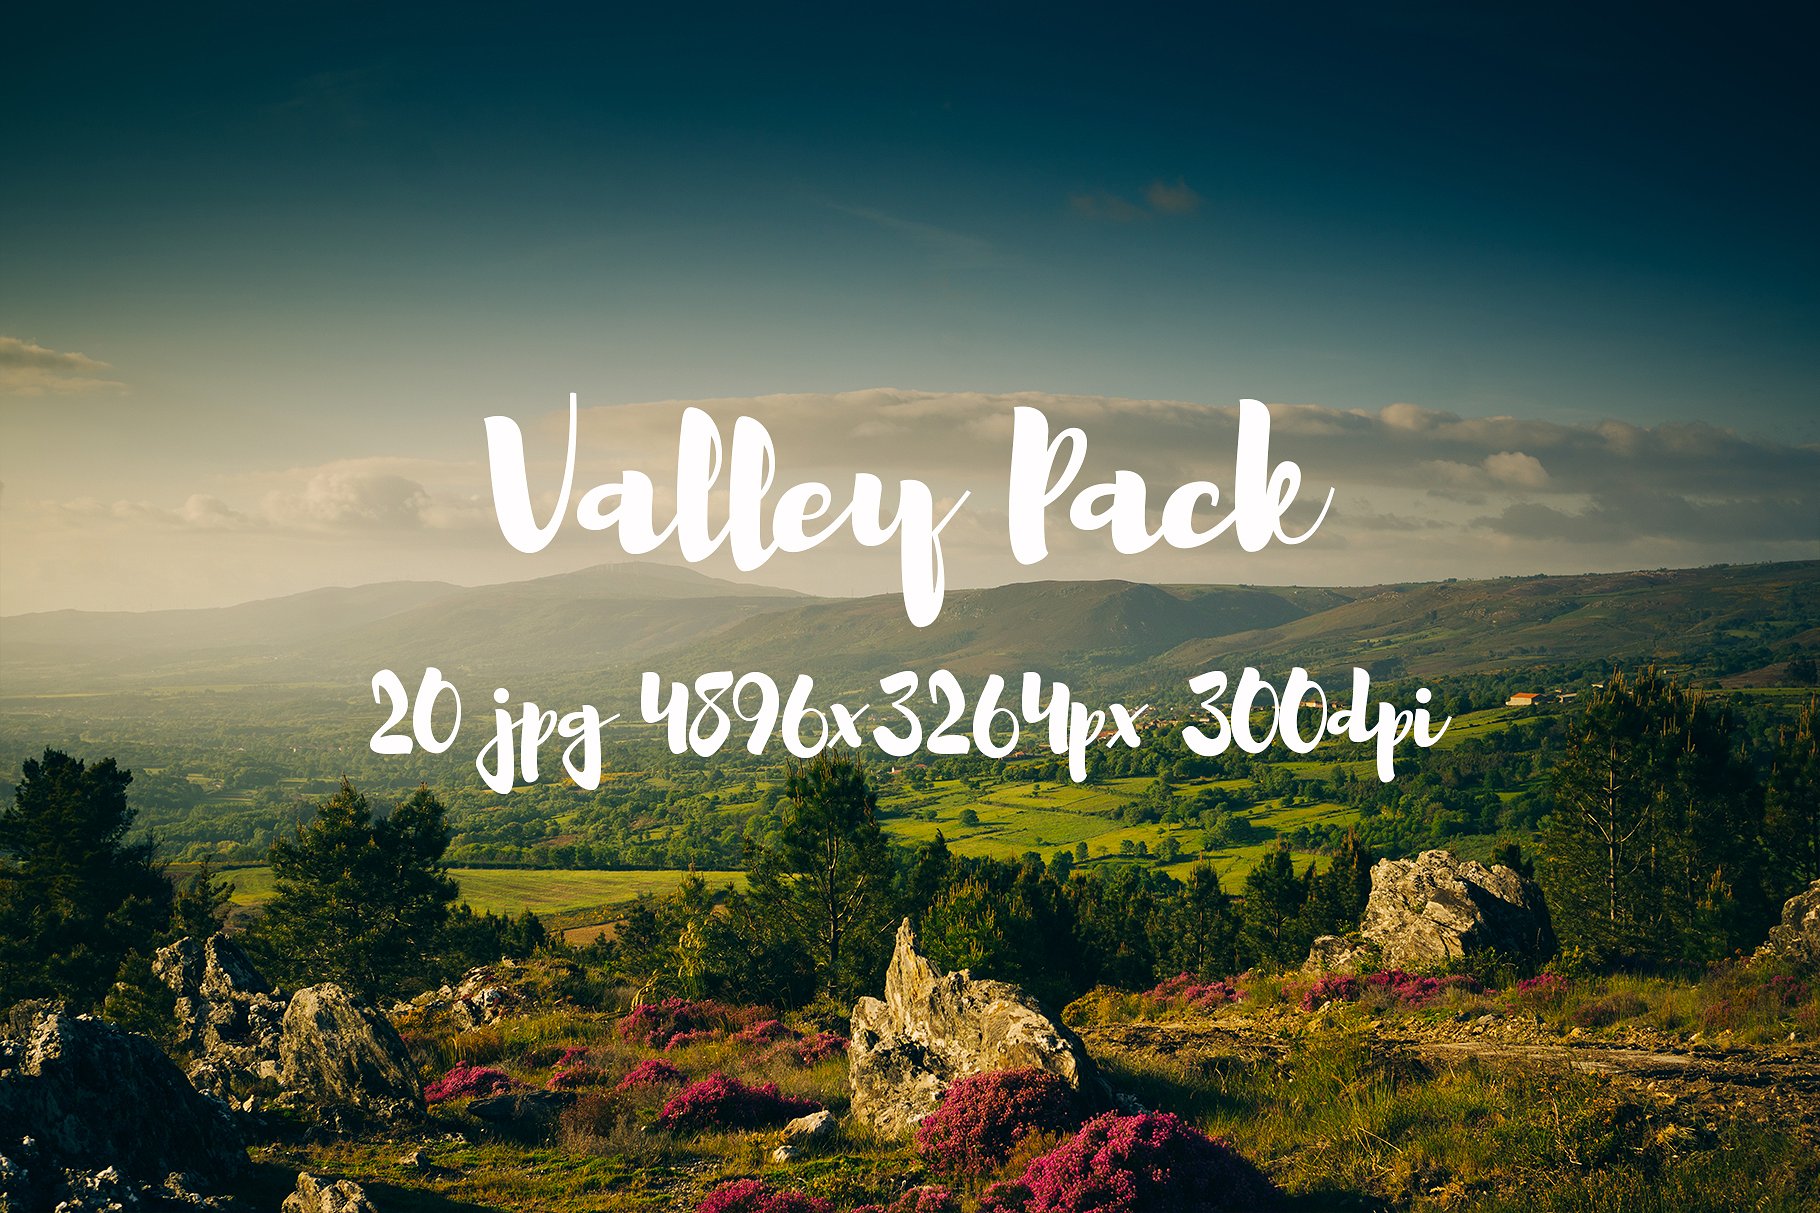 Valley Pack photo pack